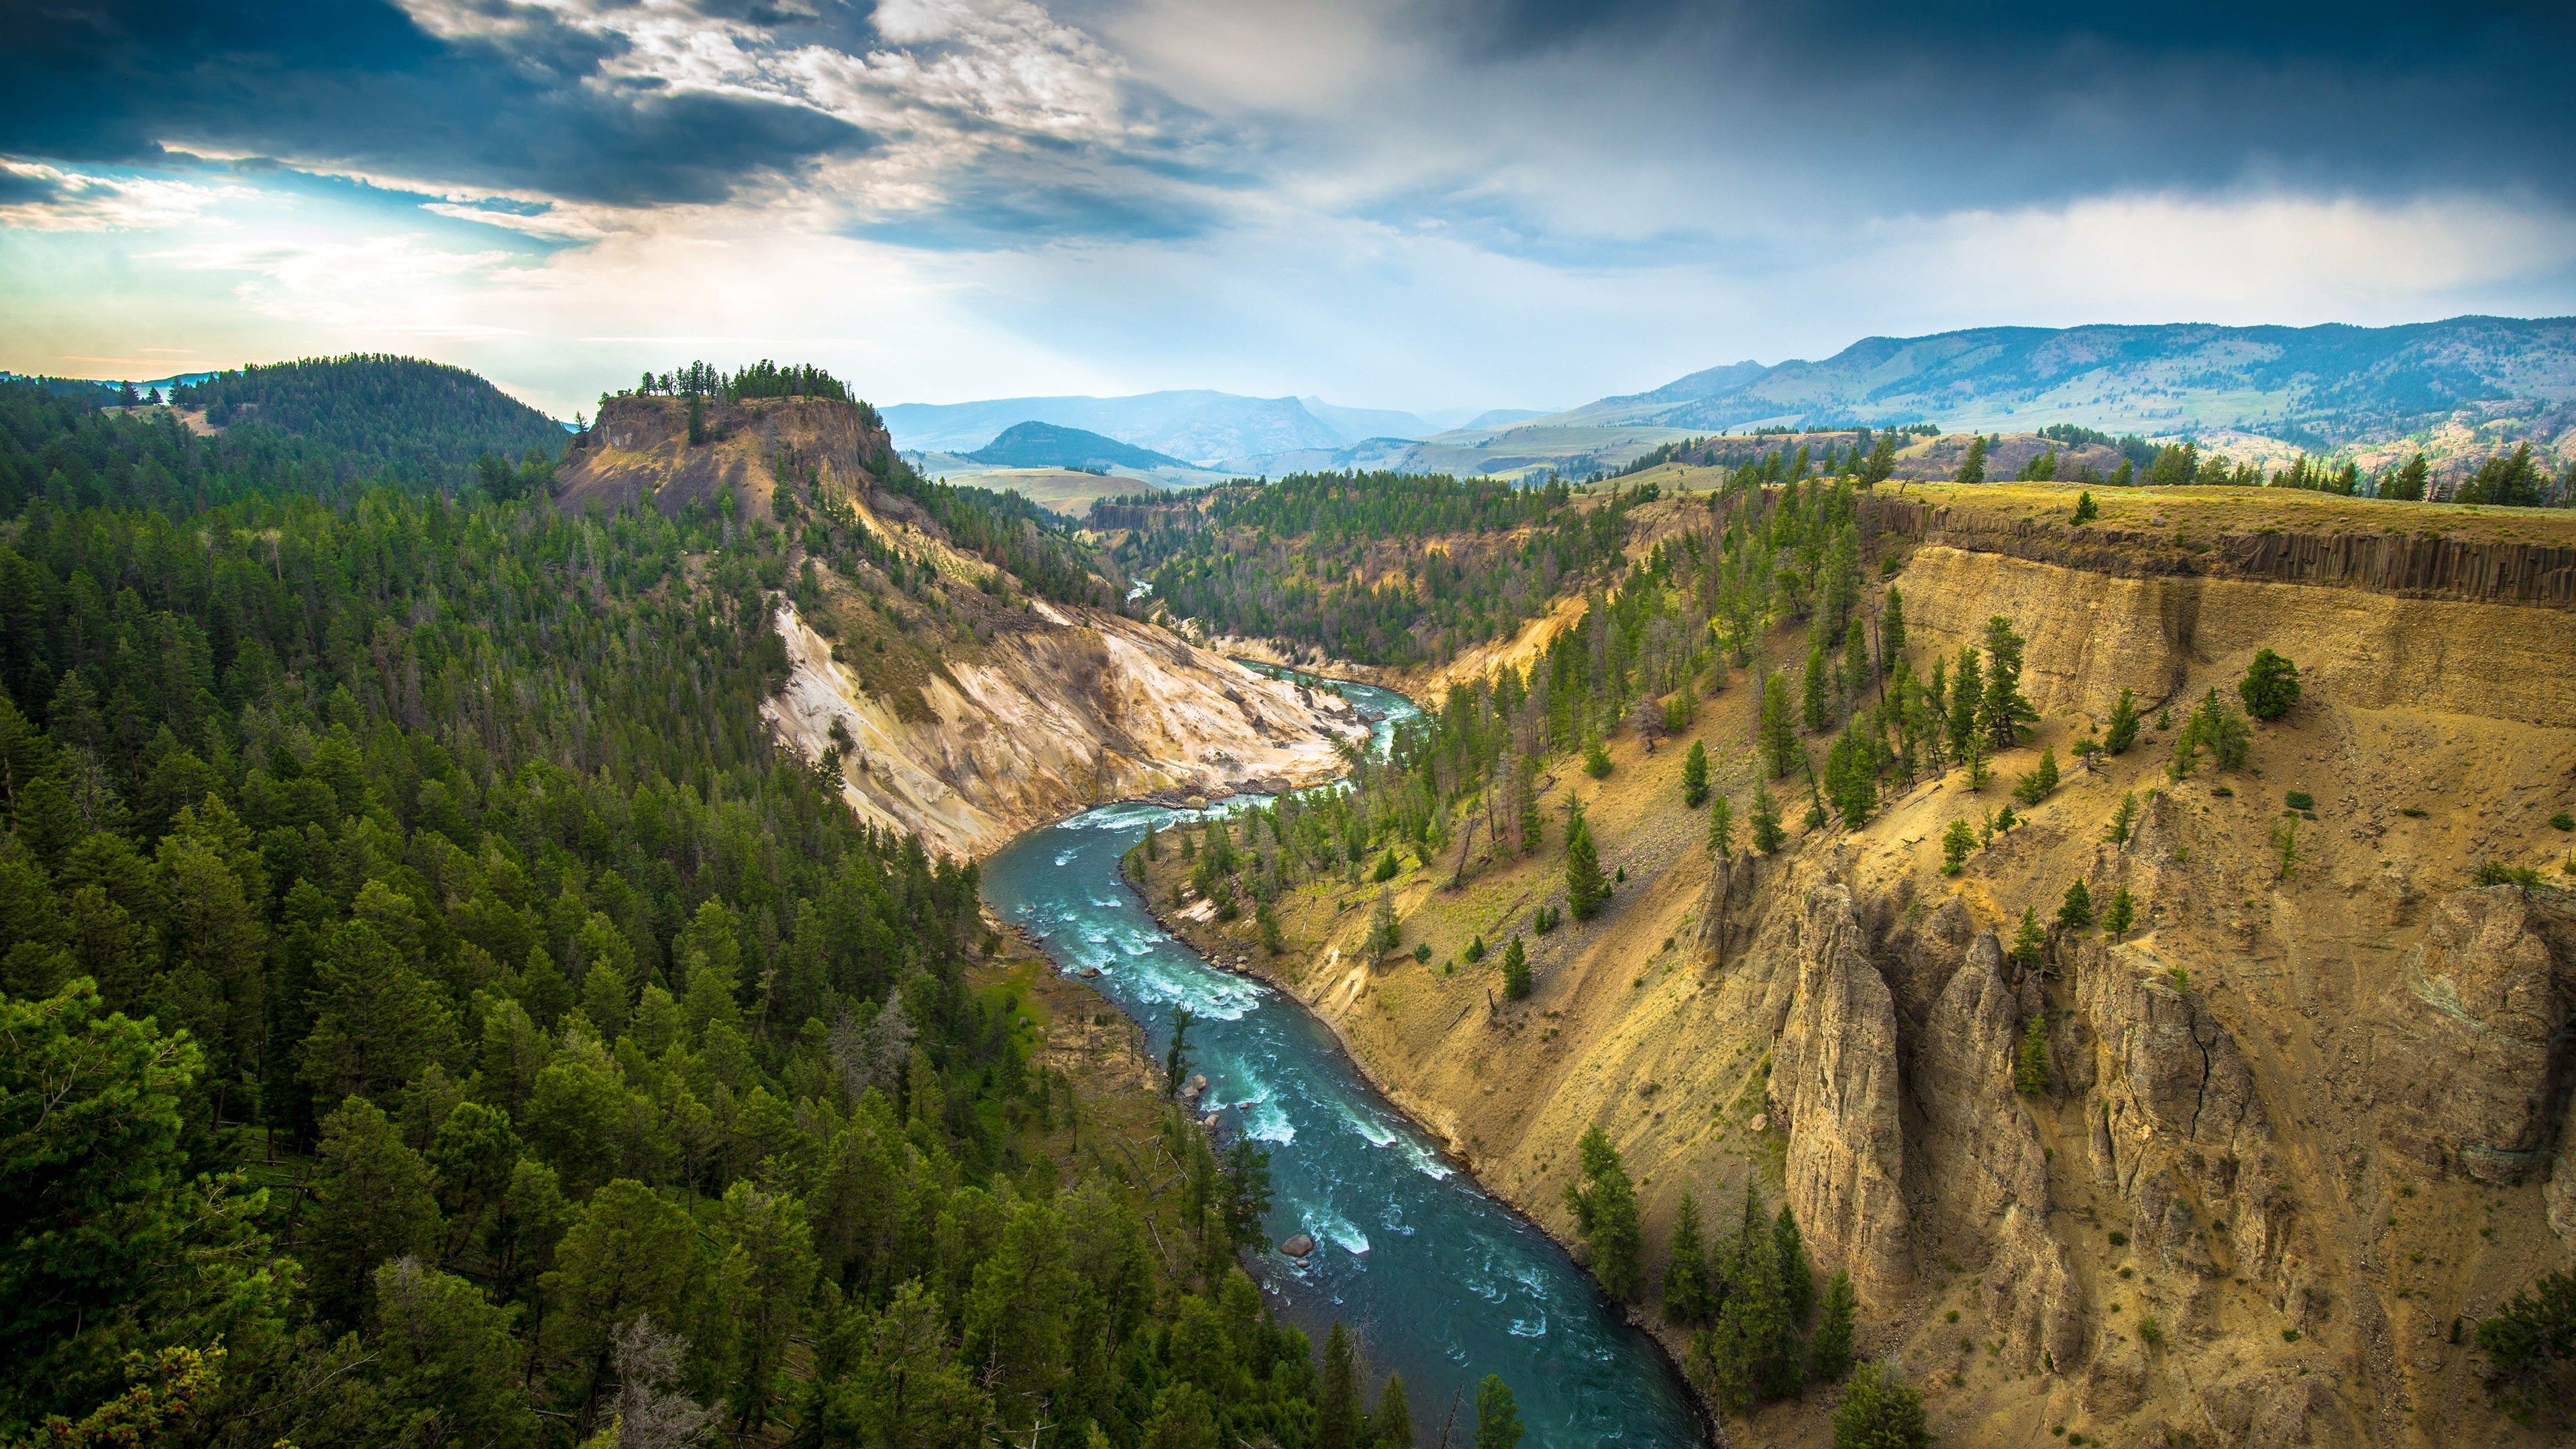 Grand Canyon of the Yellowstone Wallpaper